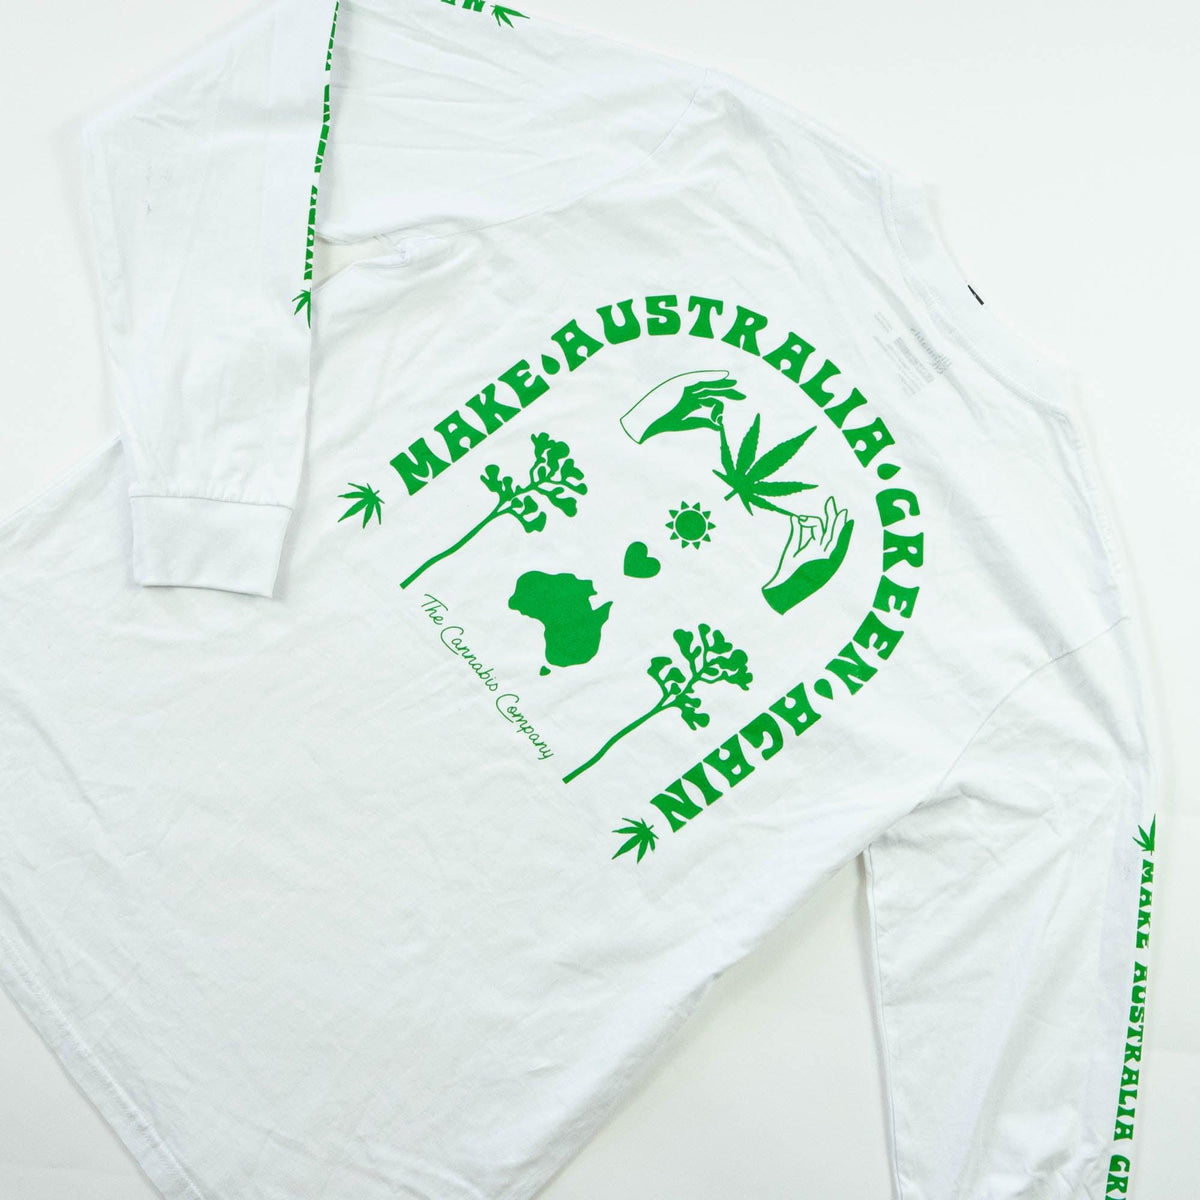 White tee by The cannabis company